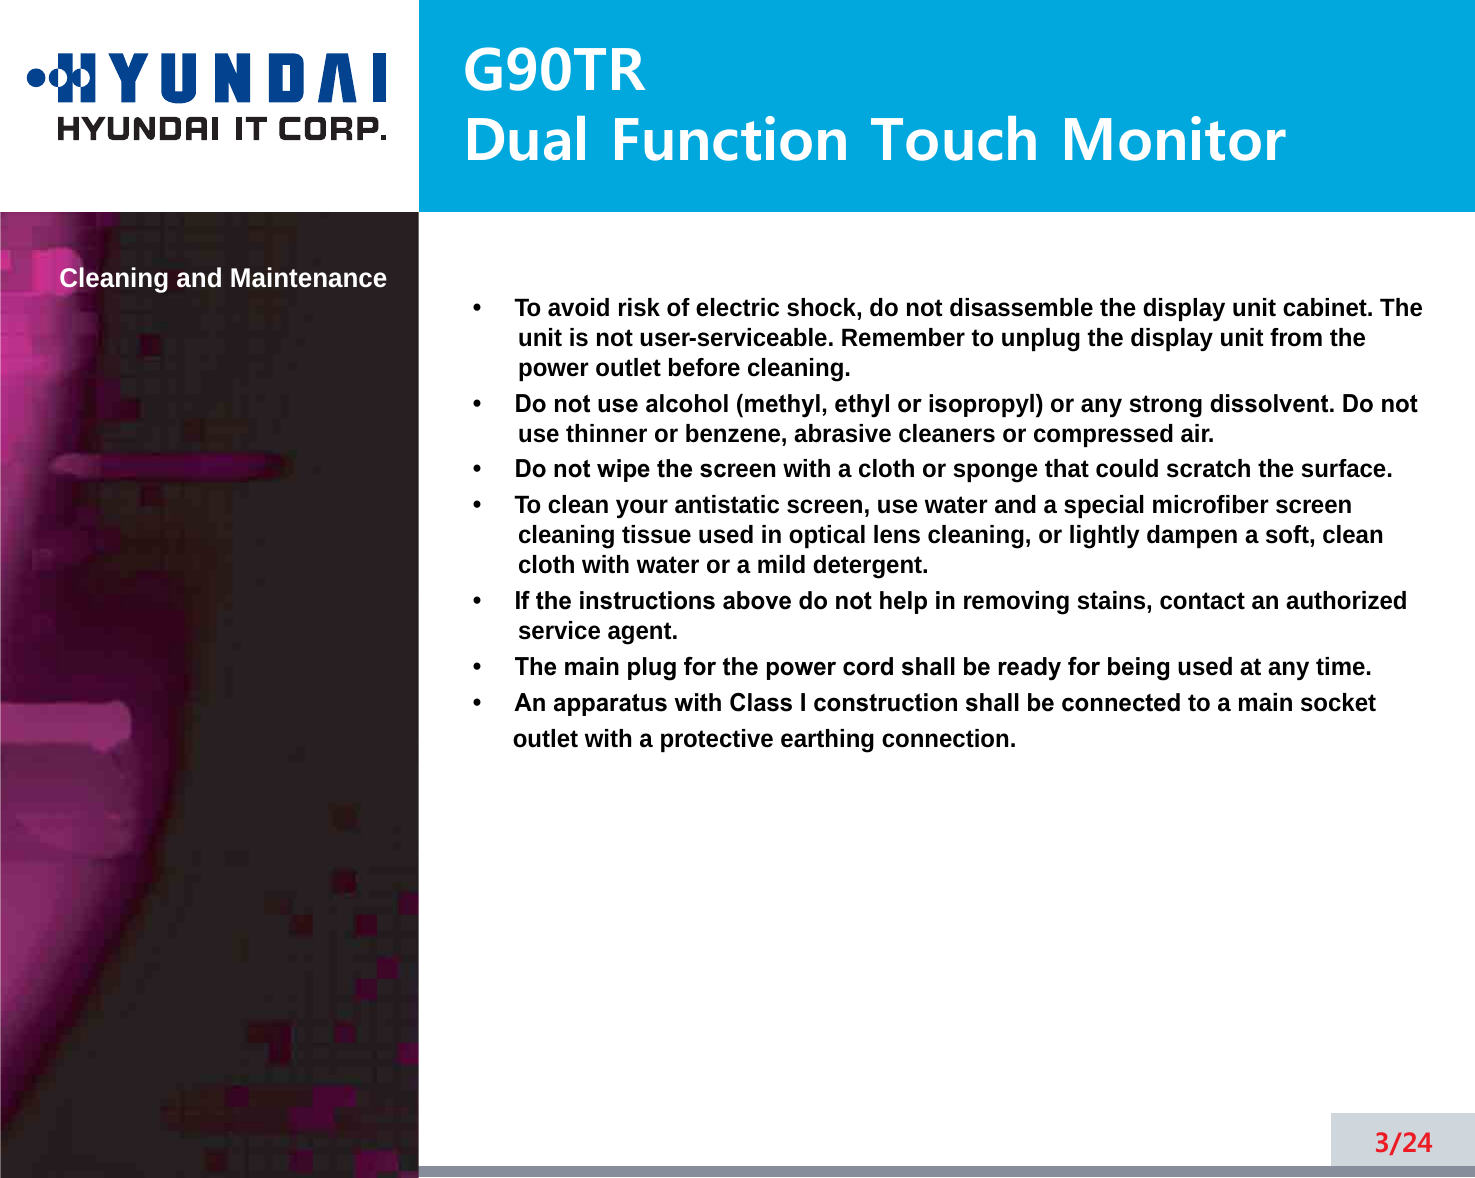 G90TRDual Function Touch MonitorCleaning and Maintenance•     To avoid risk of electric shock, do not disassemble the display unit cabinet. Theunit is not user-serviceable. Remember to unplug the display unit from thepower outlet before cleaning.•     Do not use alcohol (methyl, ethyl or isopropyl) or any strong dissolvent. Do notuse thinner or benzene, abrasive cleaners or compressed air.•     Do not wipe the screen with a cloth or sponge that could scratch the surface.•     To clean your antistatic screen, use water and a special microfiber screencleaning tissue used in optical lens cleaning, or lightly dampen a soft, cleancloth with water or a mild detergent.•     If the instructions above do not help in removing stains, contact an authorizedservice agent. •     The main plug for the power cord shall be ready for being used at any time.•     An apparatus with Class I construction shall be connected to a main socket outlet with a protective earthing connection.3/24